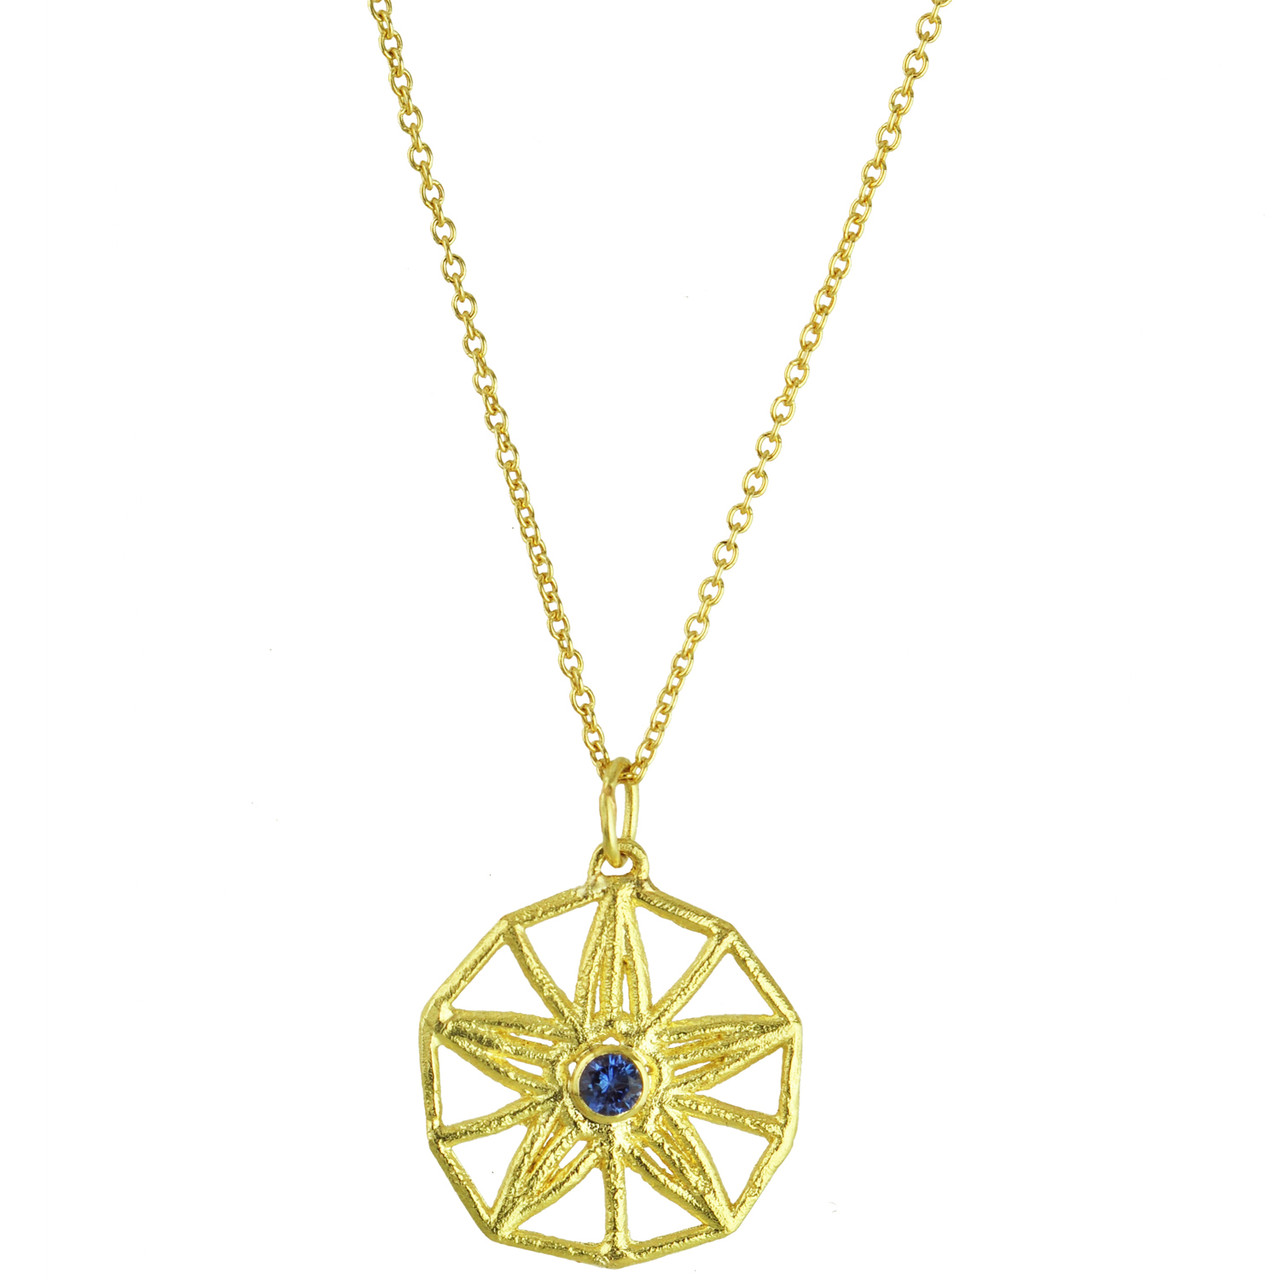 18ct Yellow Gold Sapphire Star Necklace, Claire Macfarlane, tomfoolery